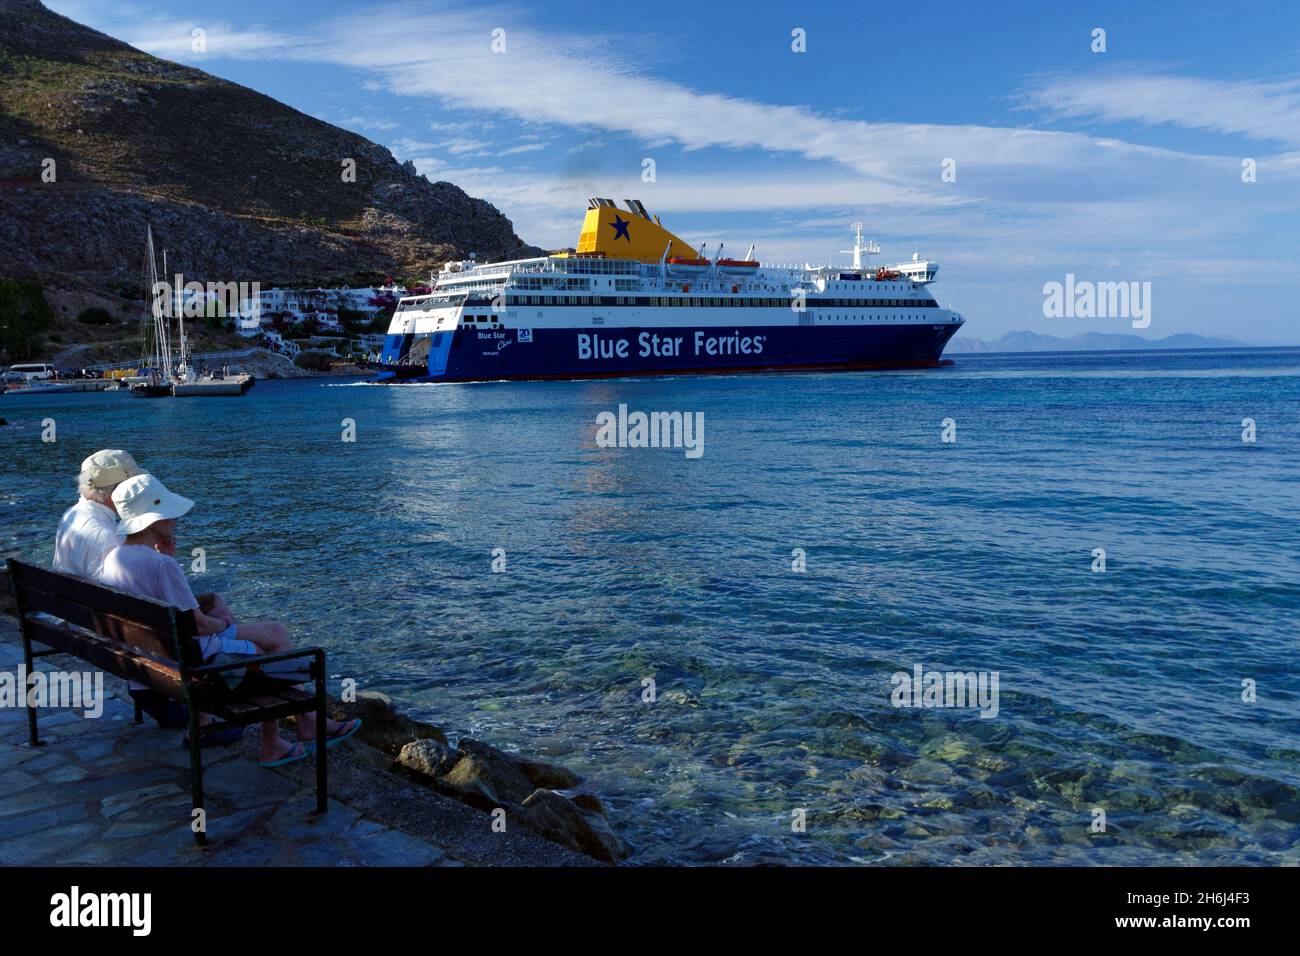 Blue Star Ferries ship The Chios arriving at  Livadia harbour, Tilos, Dodecanese islands, Southern Aegean, Greece. Stock Photo